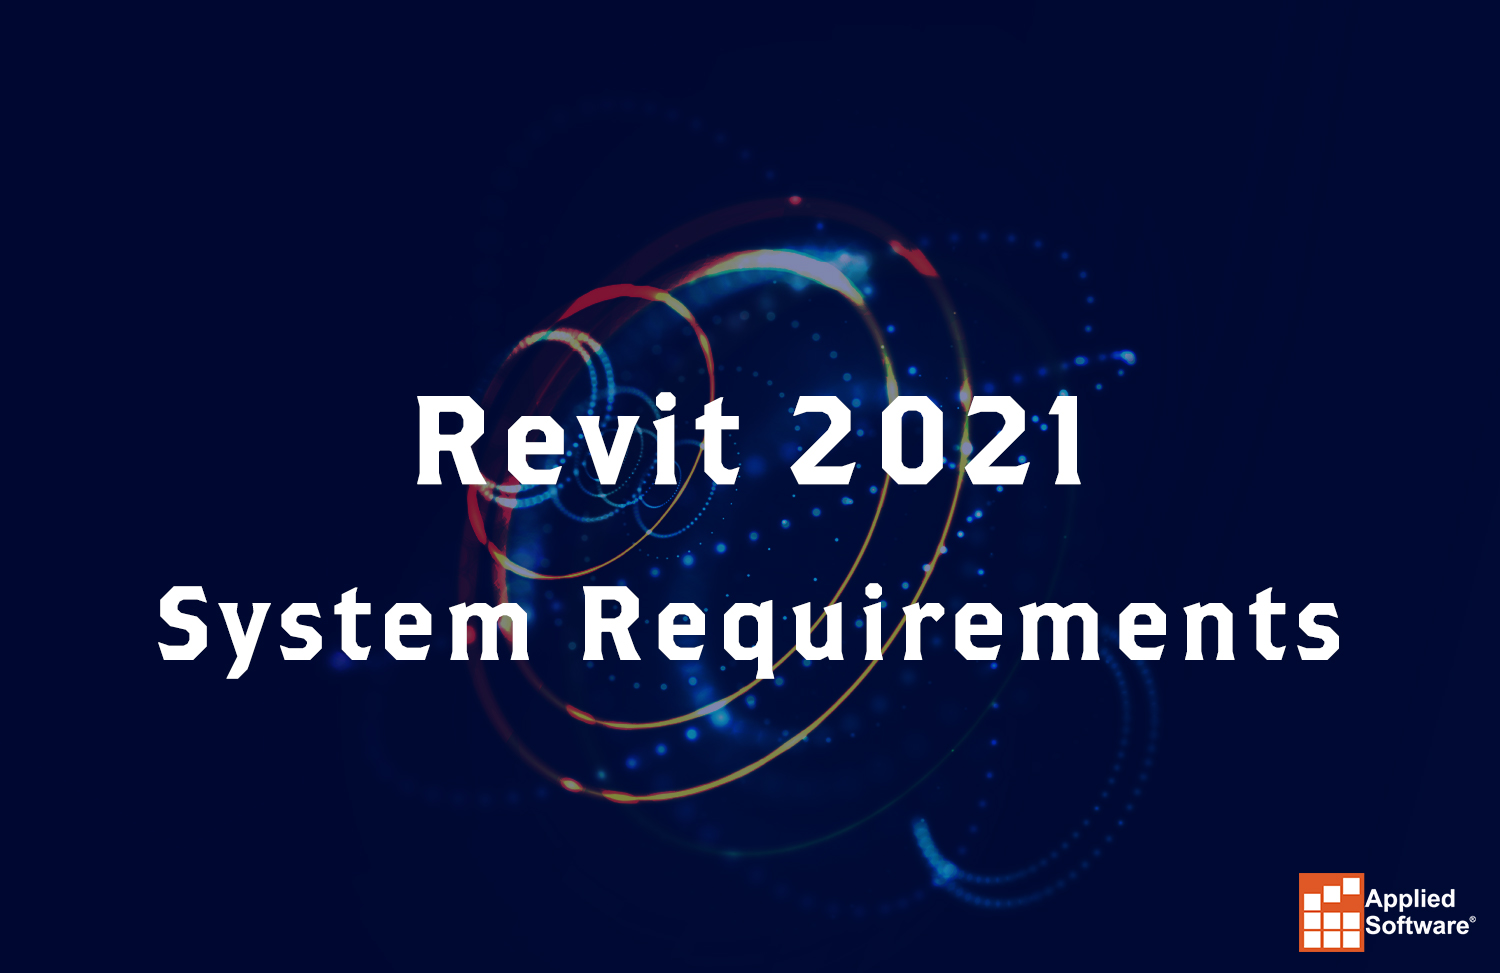 Check that your operating system and hardware meet the minimum requirements for Revit
Check for compatibility with other software or add-ins installed on your computer